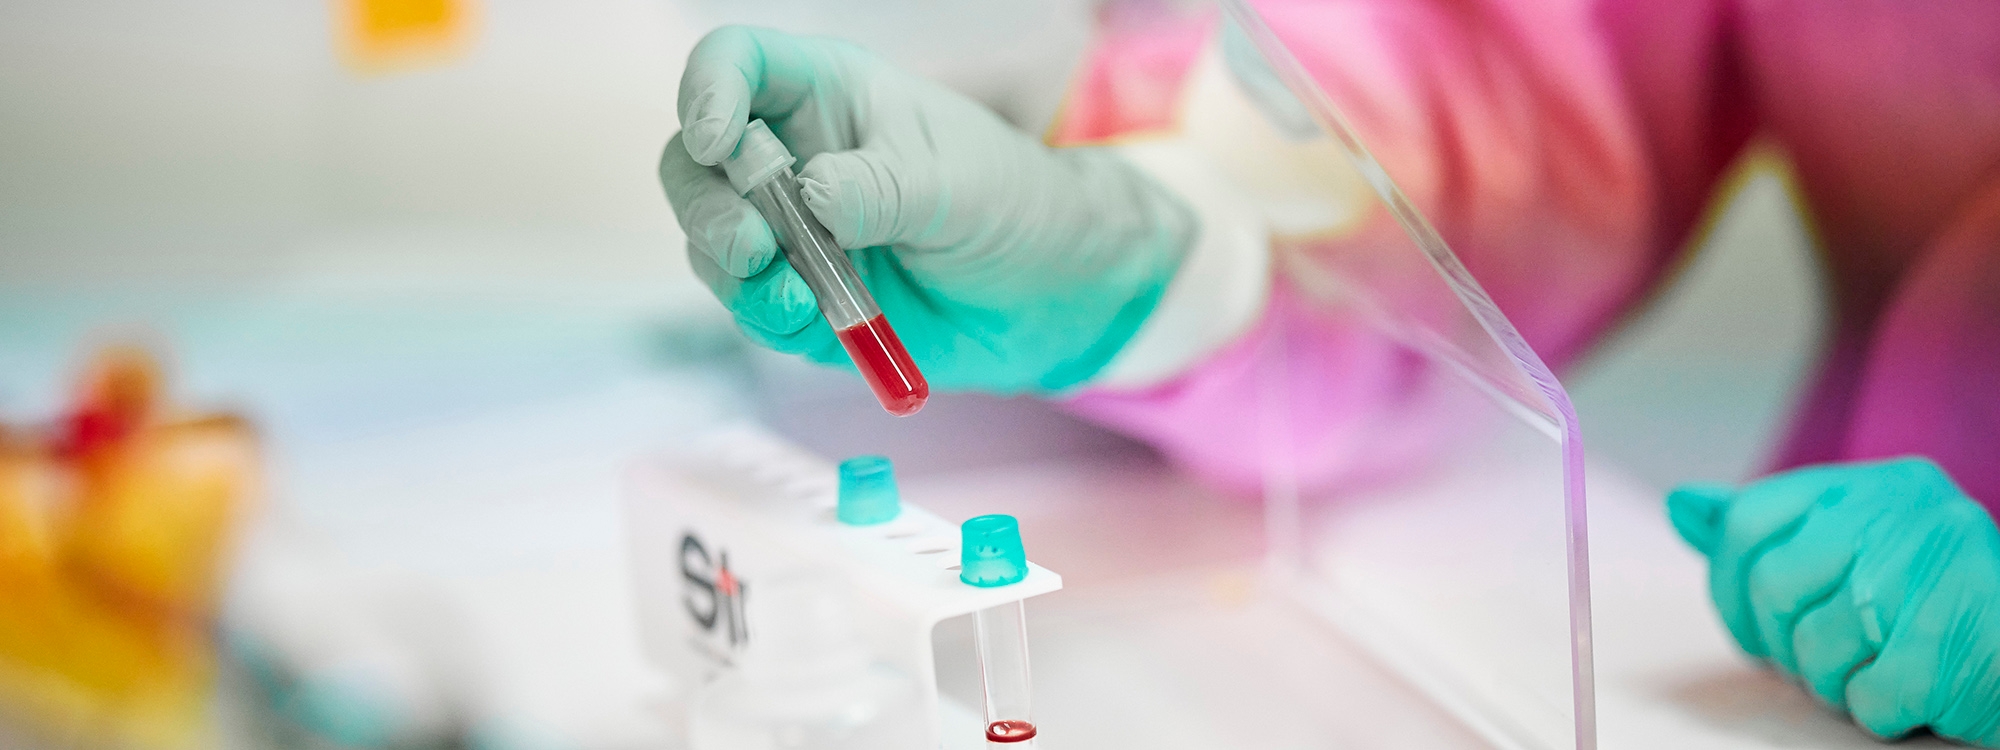 Lab technician holding vial with red liquid